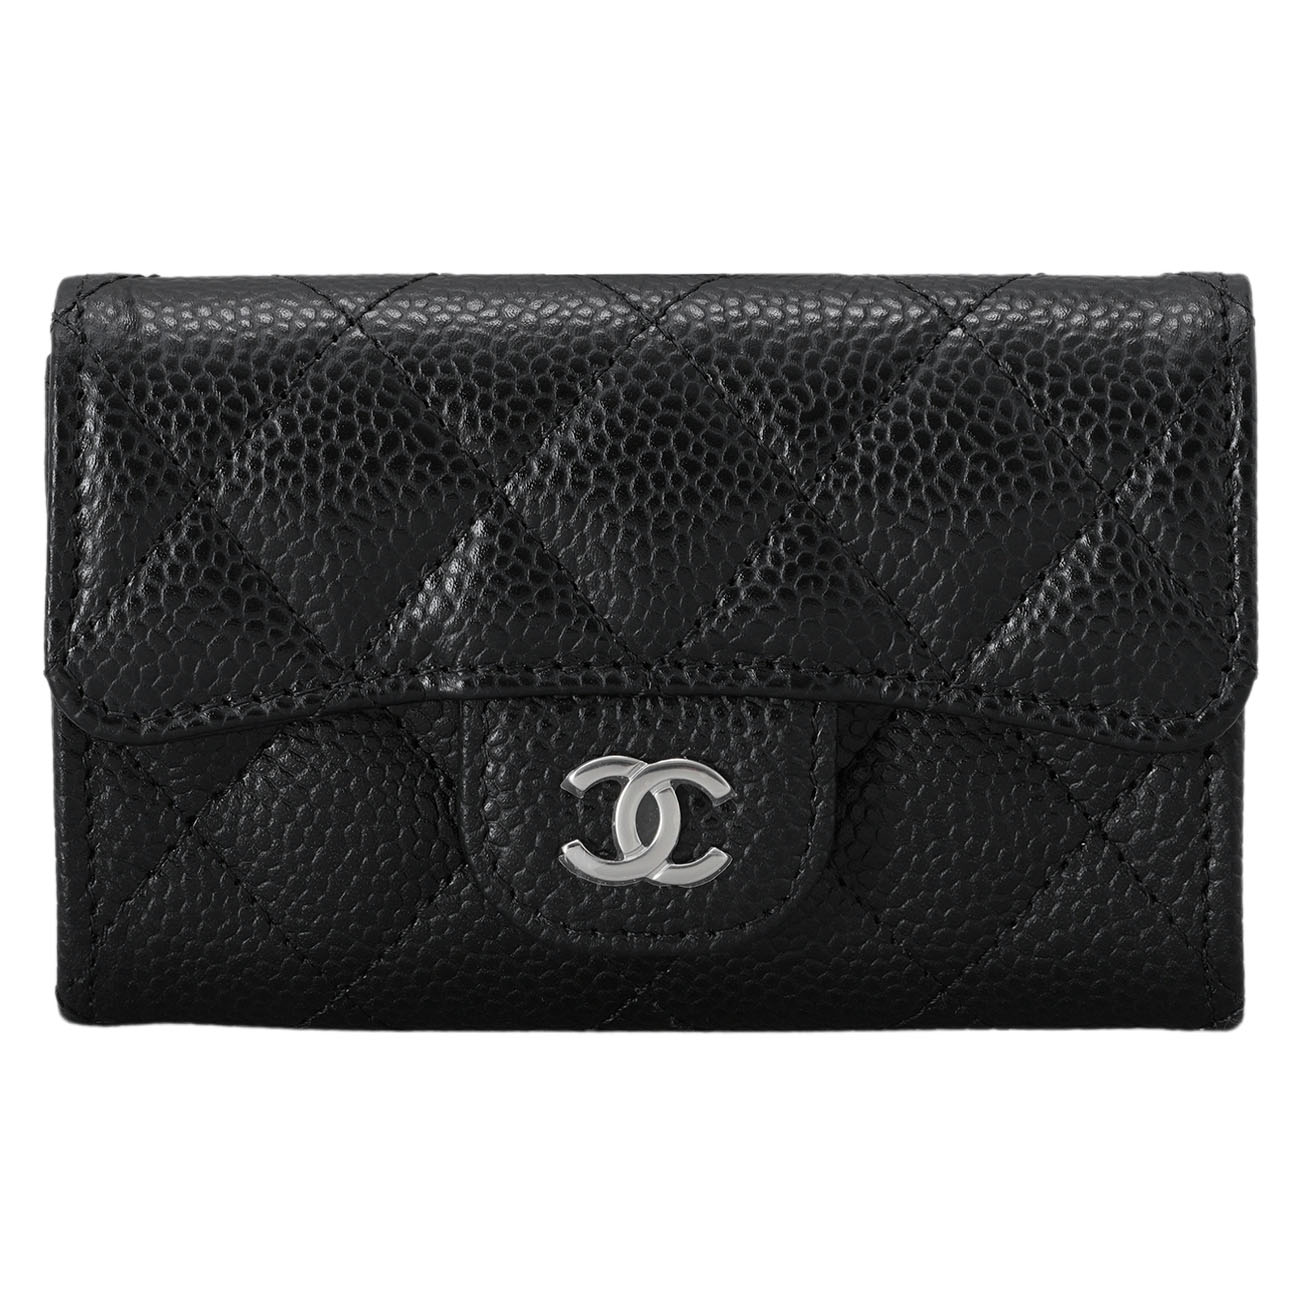 CHANEL(USED)샤넬 캐비어 클래식 카드지갑 NEW PRODUCT